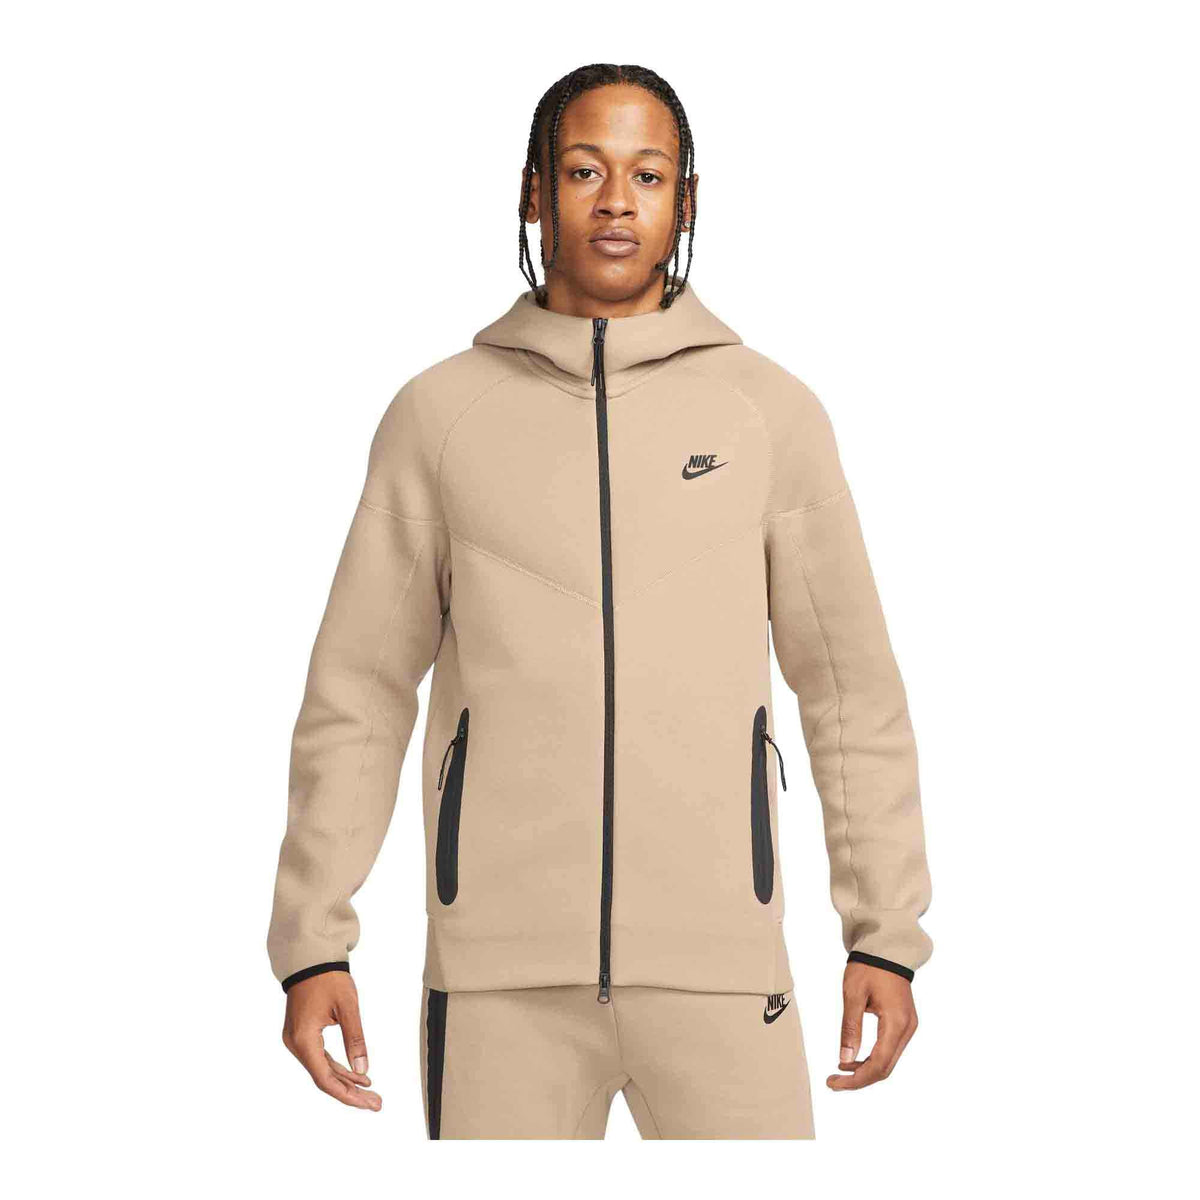 cool ways to lace nike shoes clearance size 2 5 Men's Full-Zip Hoodie